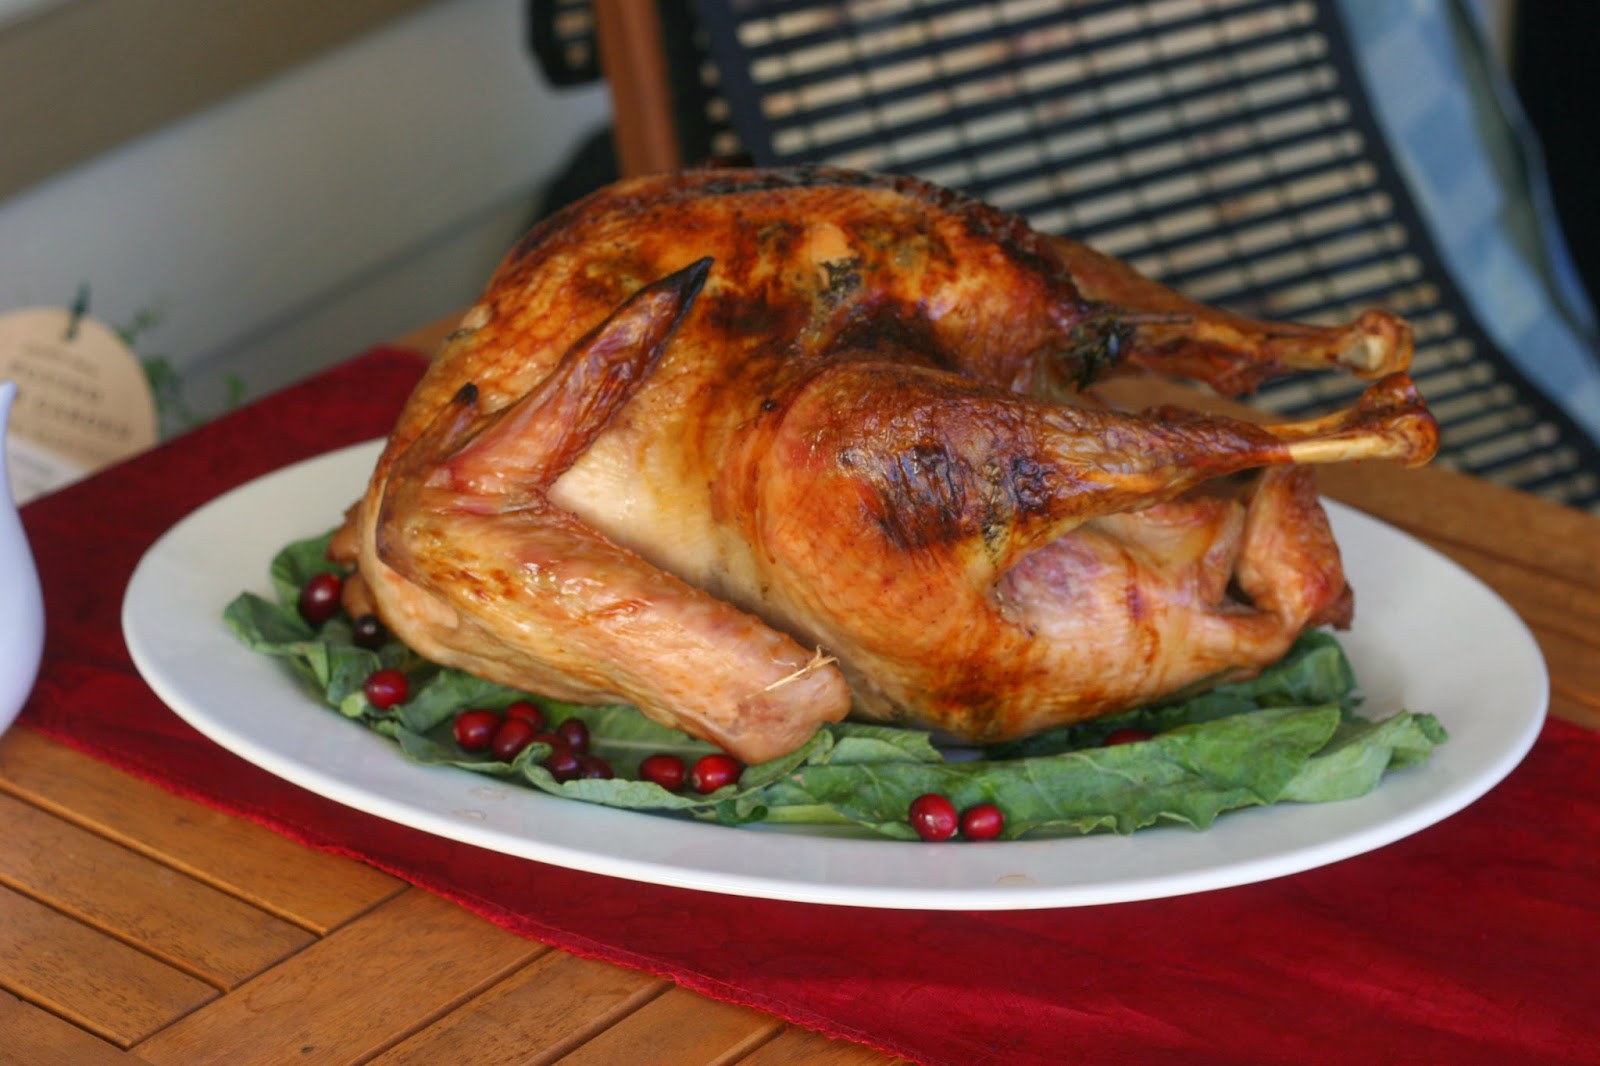 Forking Up The Best Turkey You Ll Ever Eat How To Cook The Perfect Thanksgiving Turkey